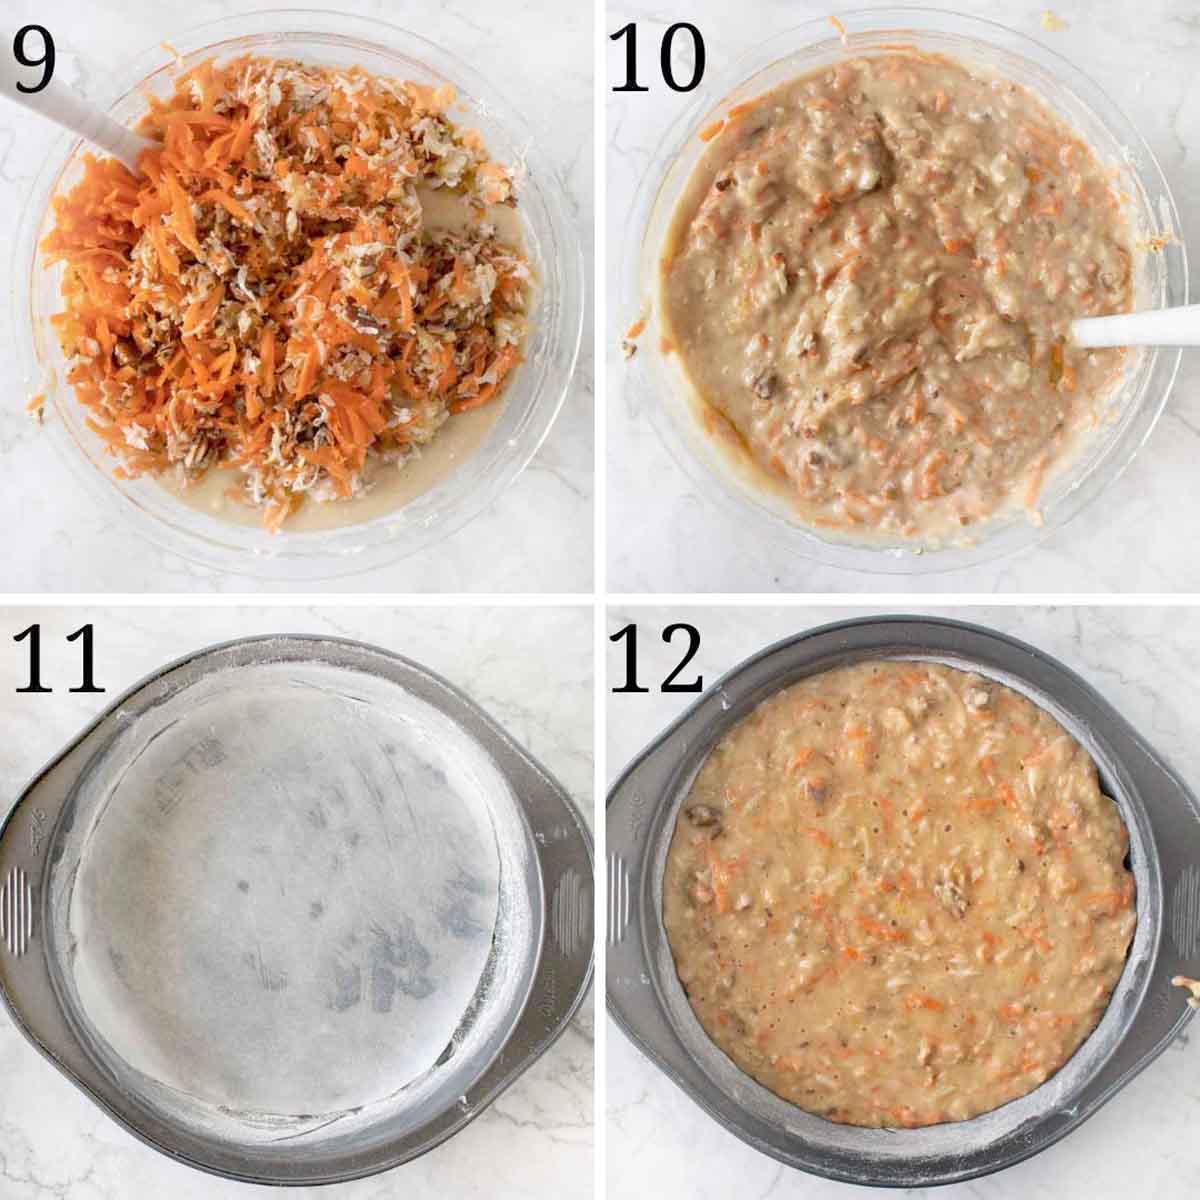 collage showing the final steps in making cake batter and baking